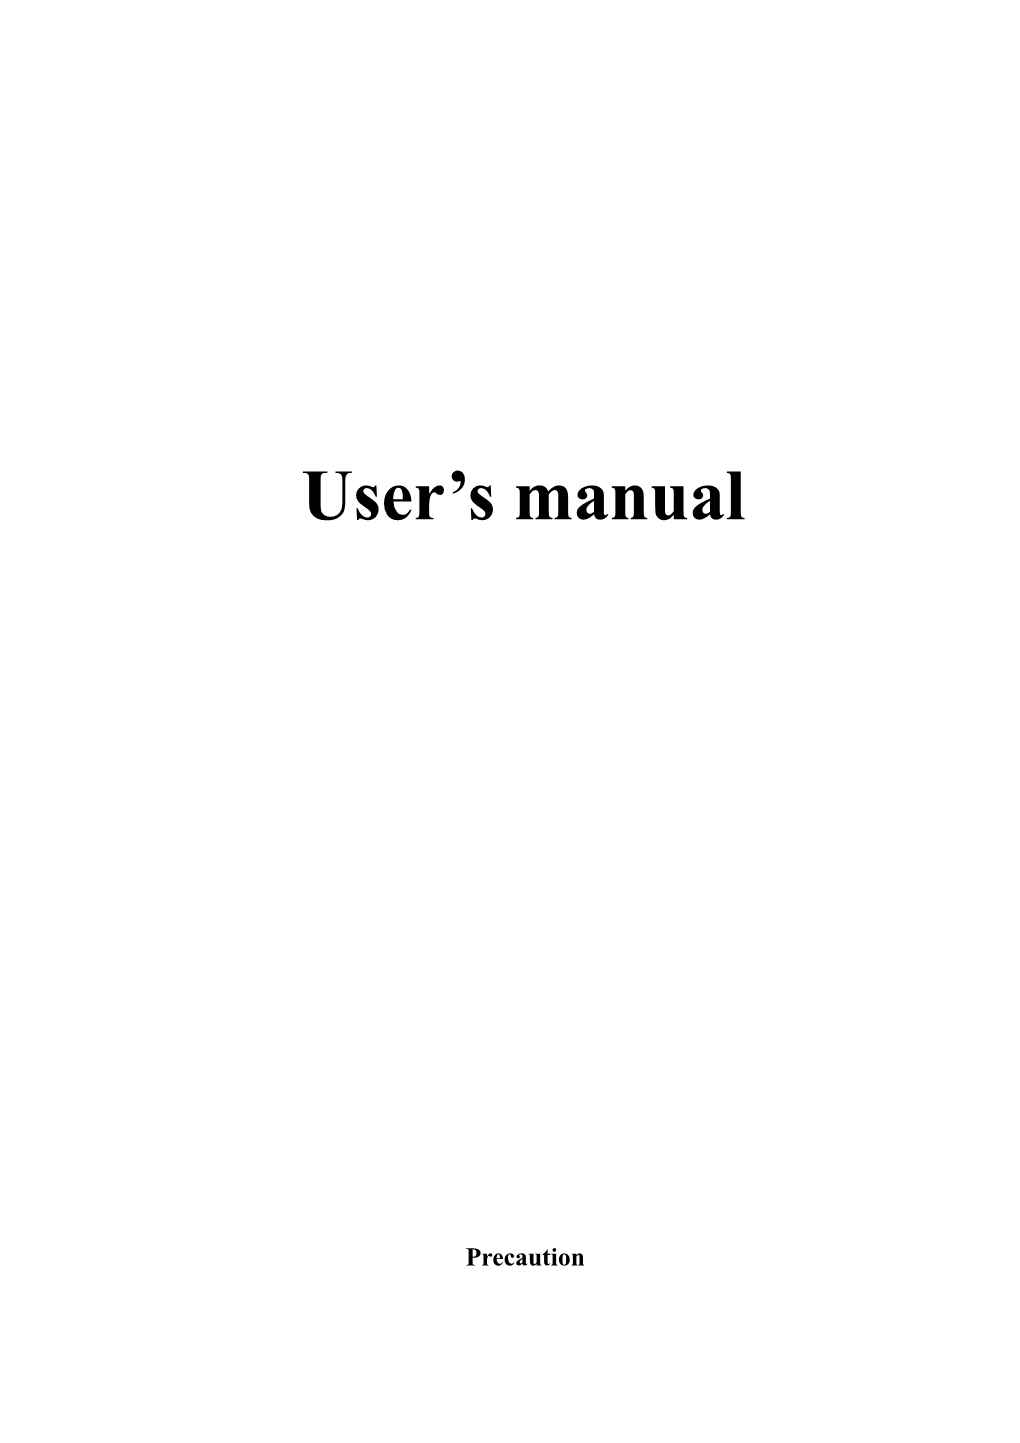 In Order to Avoid Accidents, Please Read User S Manual Carefully Before Operations